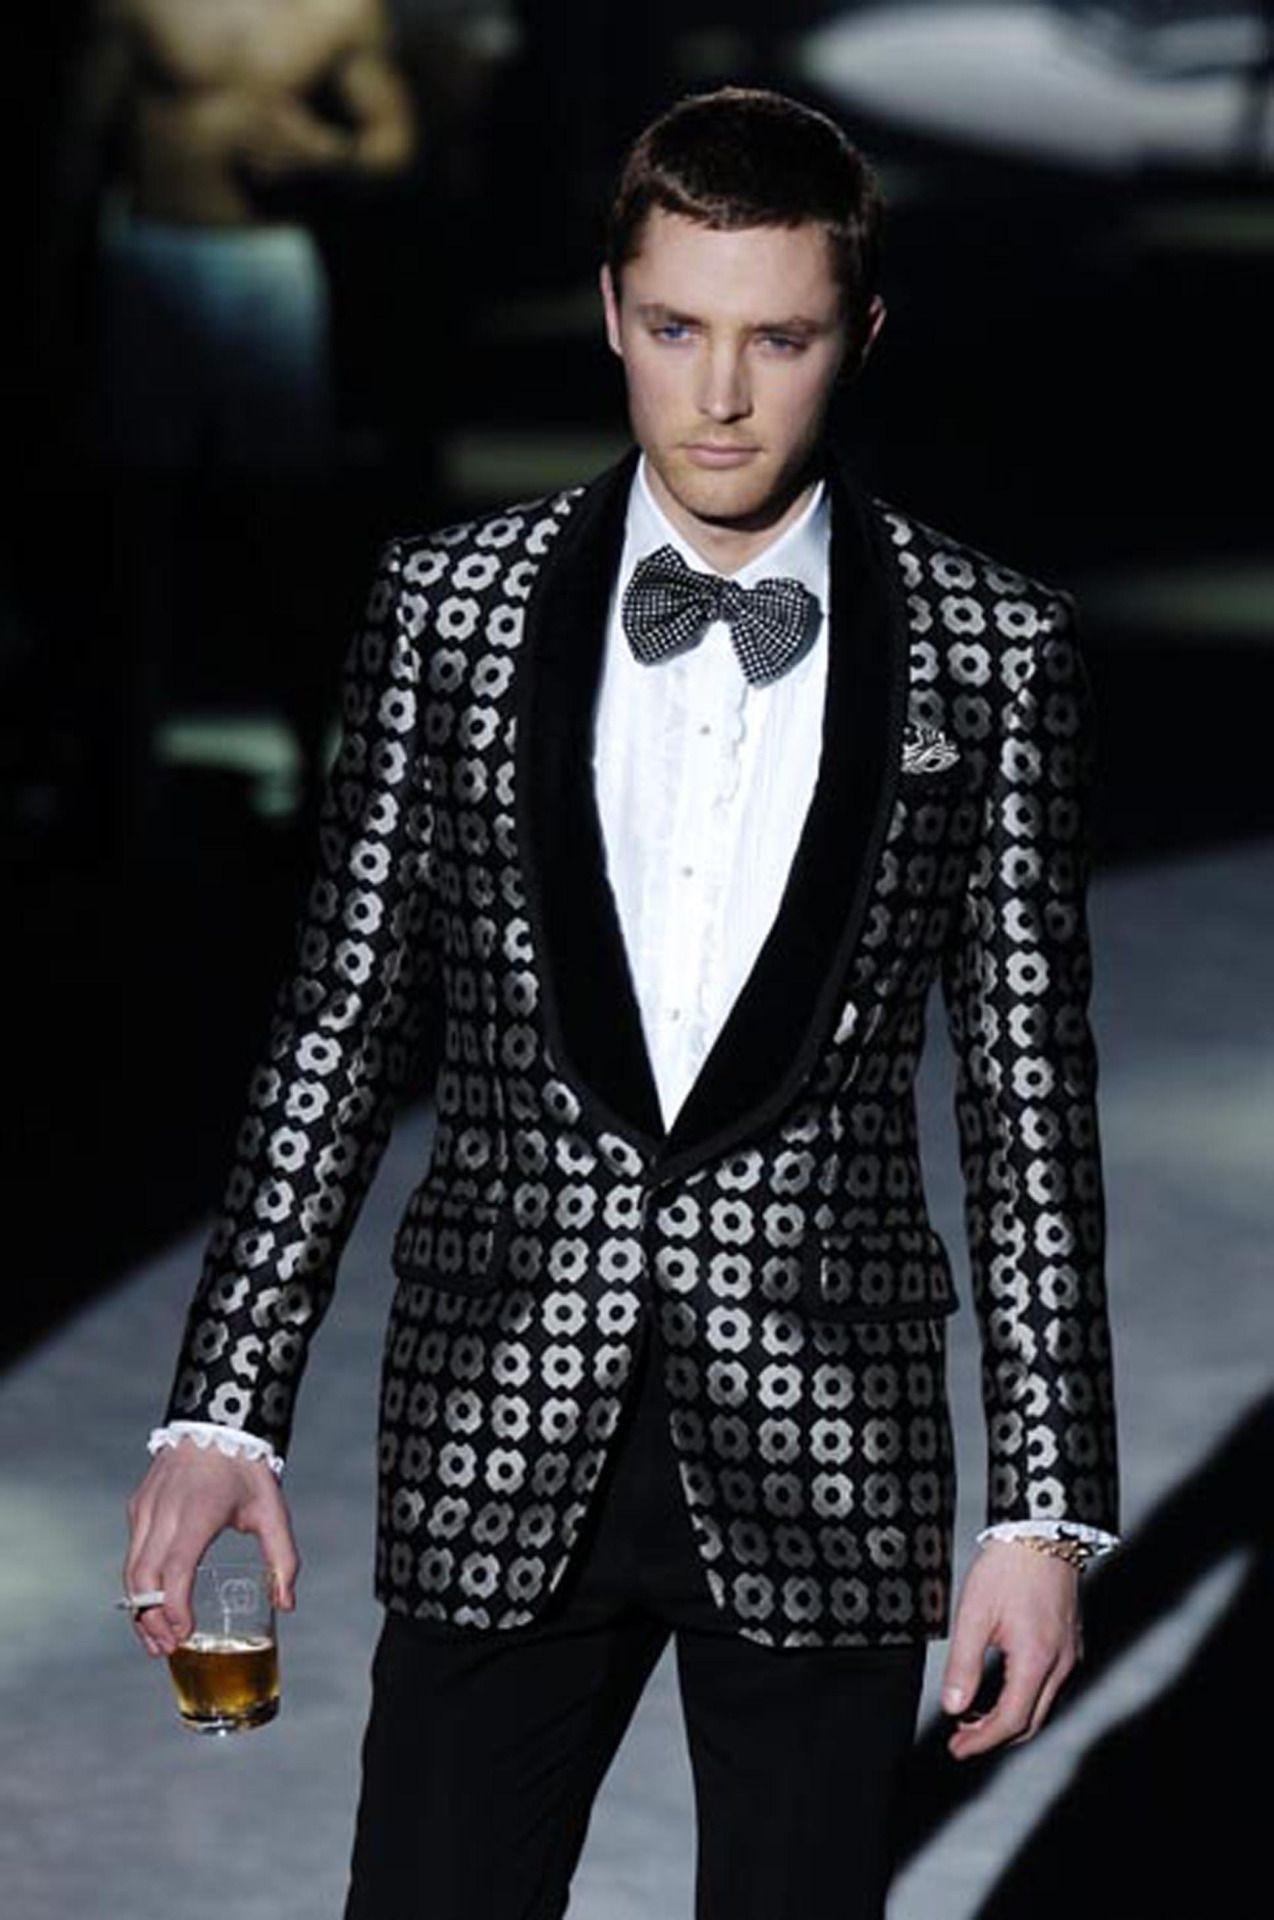 Rare Tom Ford for Gucci Tuxedo Cocktail Blazer Jacket
Fall/Winter 2004 Runway Collection
Designer size 50 R - US 40 R
Black and Silver Gray Colors, Midnight Black Velvet Shawl Lapel, Single Velvet Button Closure.
Chest Pocket, Two Flap Pockets, Four